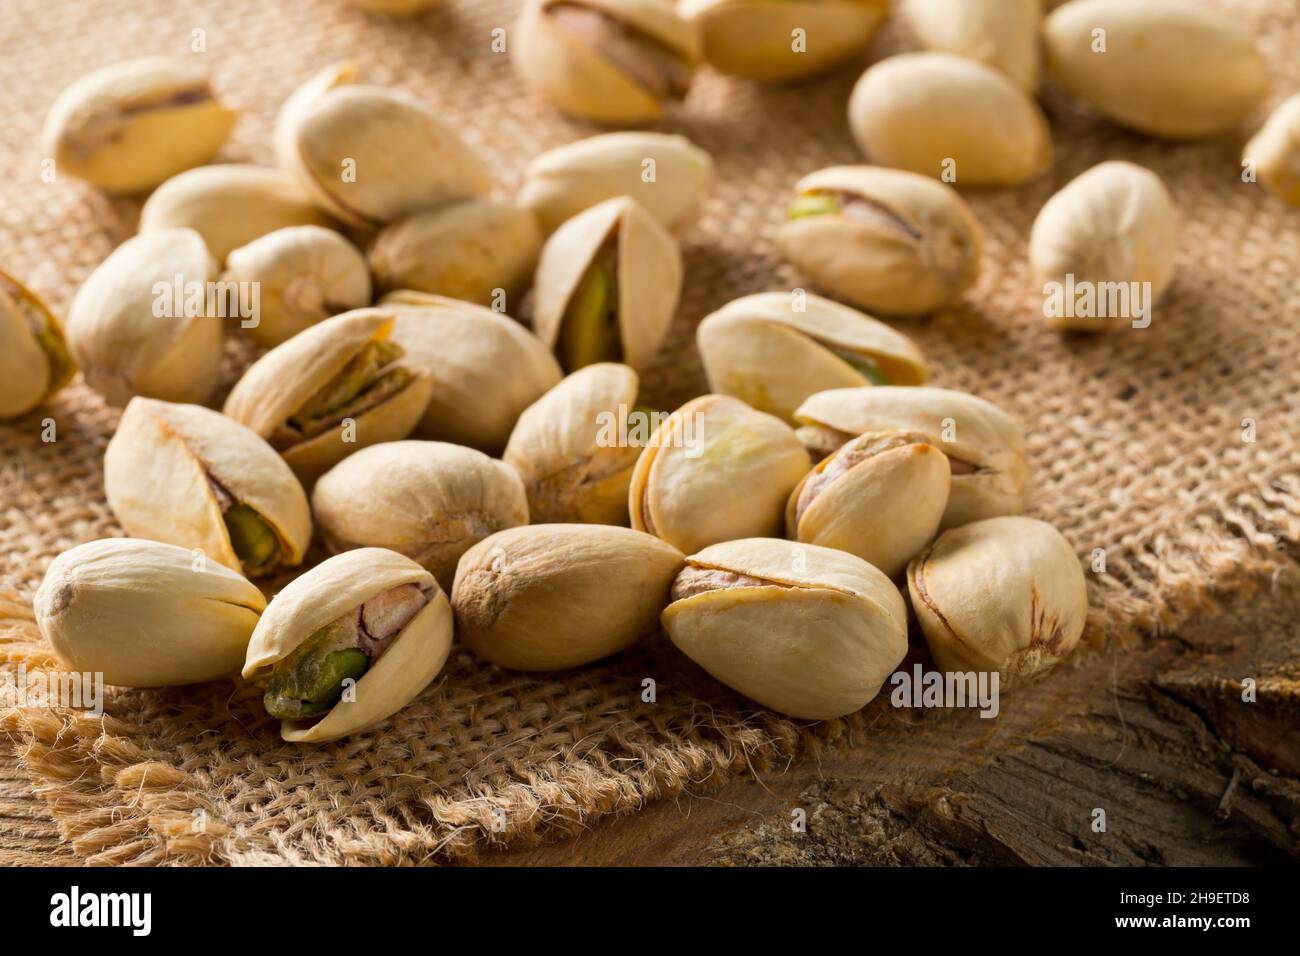 Heap of salted, roasted green pistachio nuts snack on burlap sack background, healthy food snack, selective focus Stock Photo